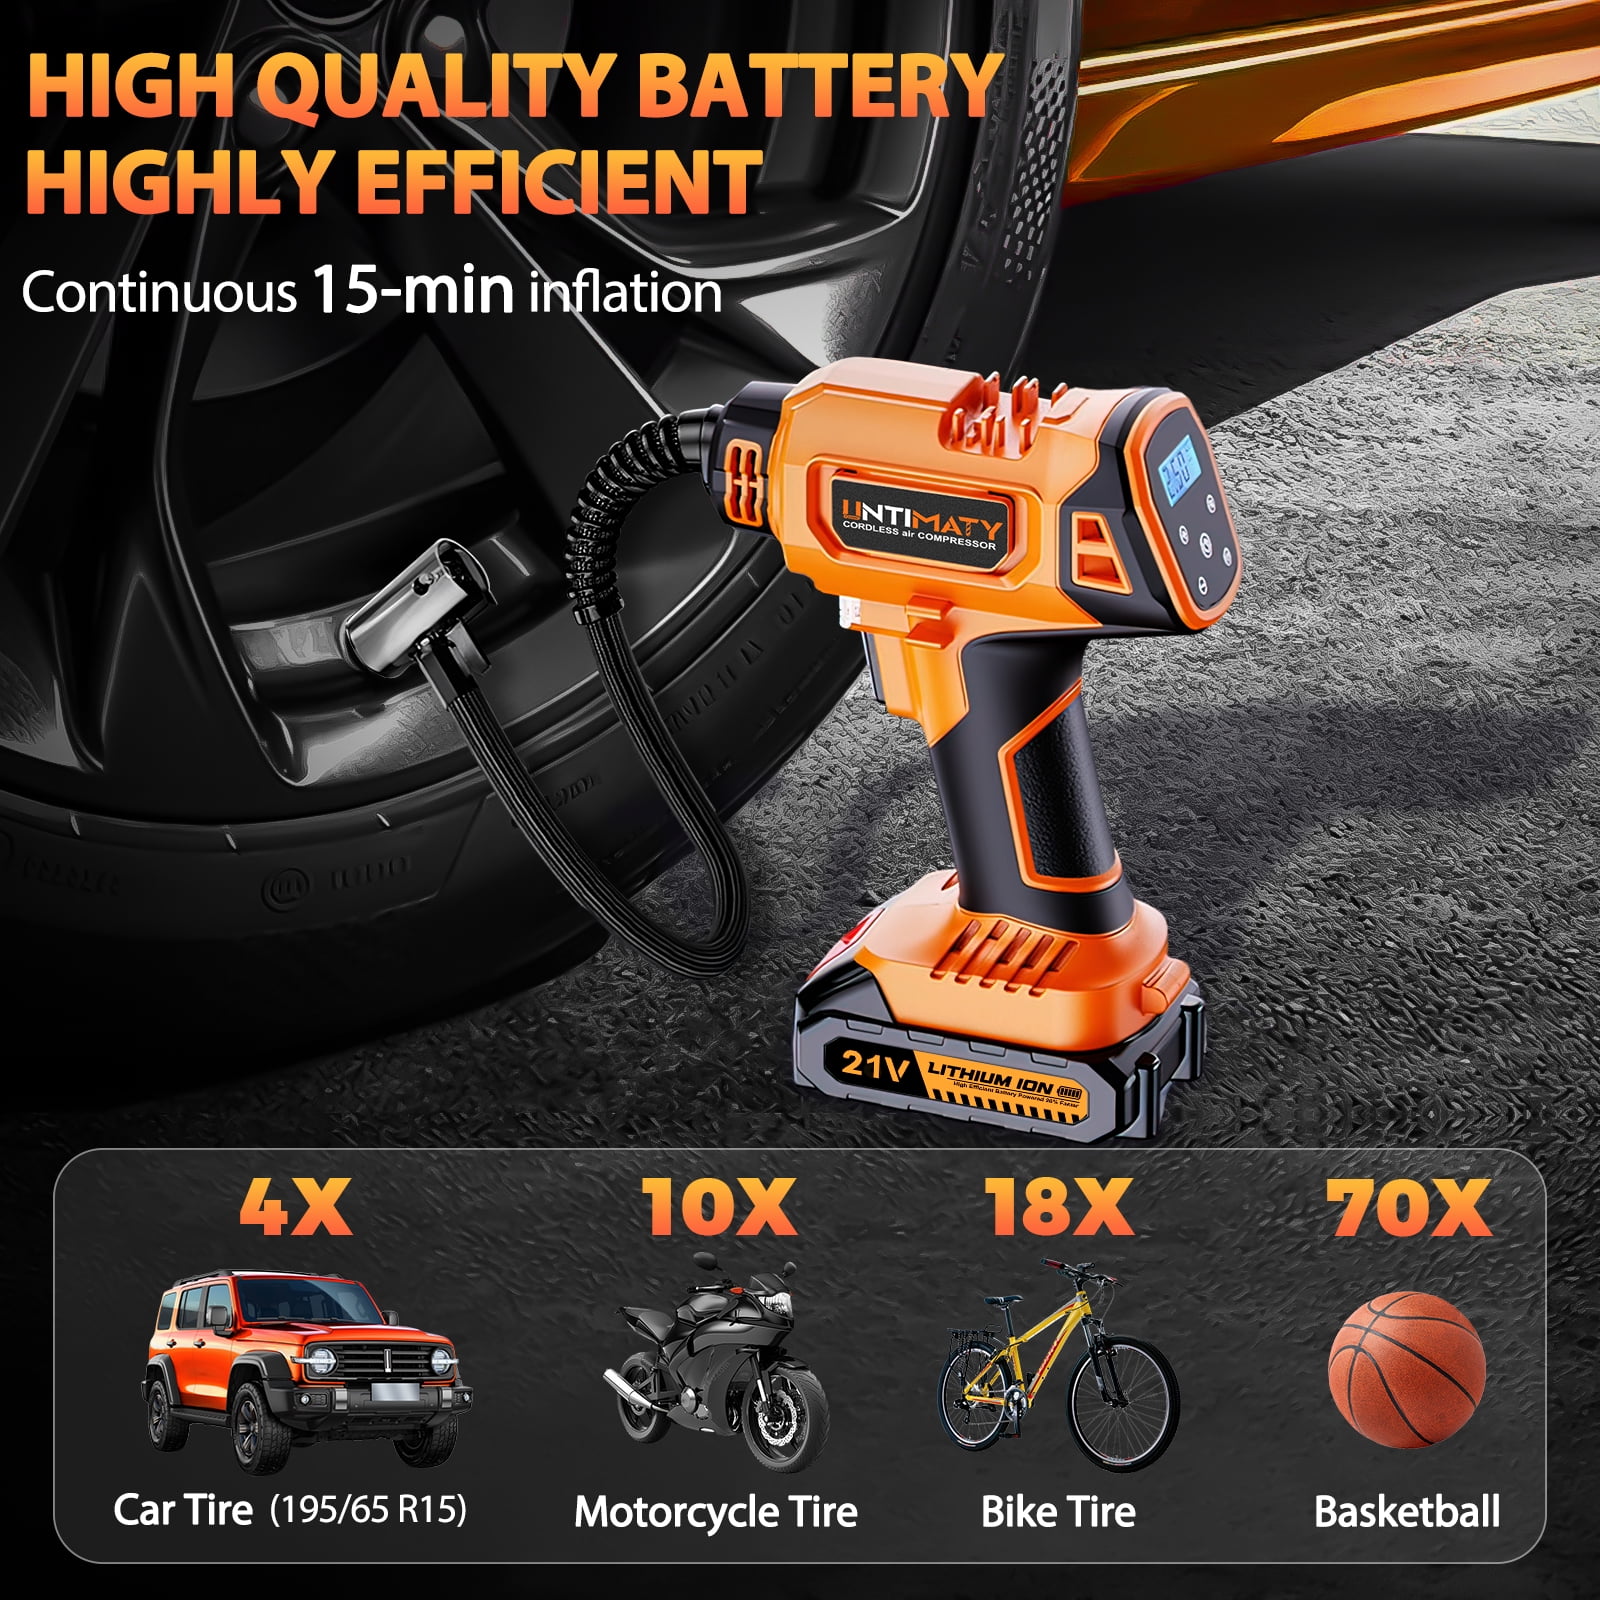 Cordless Tire Inflator, UNTIMATY Portable Air Compressor, 150PSI Handheld Air  Pump with 21V Rechargeable Battery, Digital Pressure Gauge for Cars  Motorcycles 